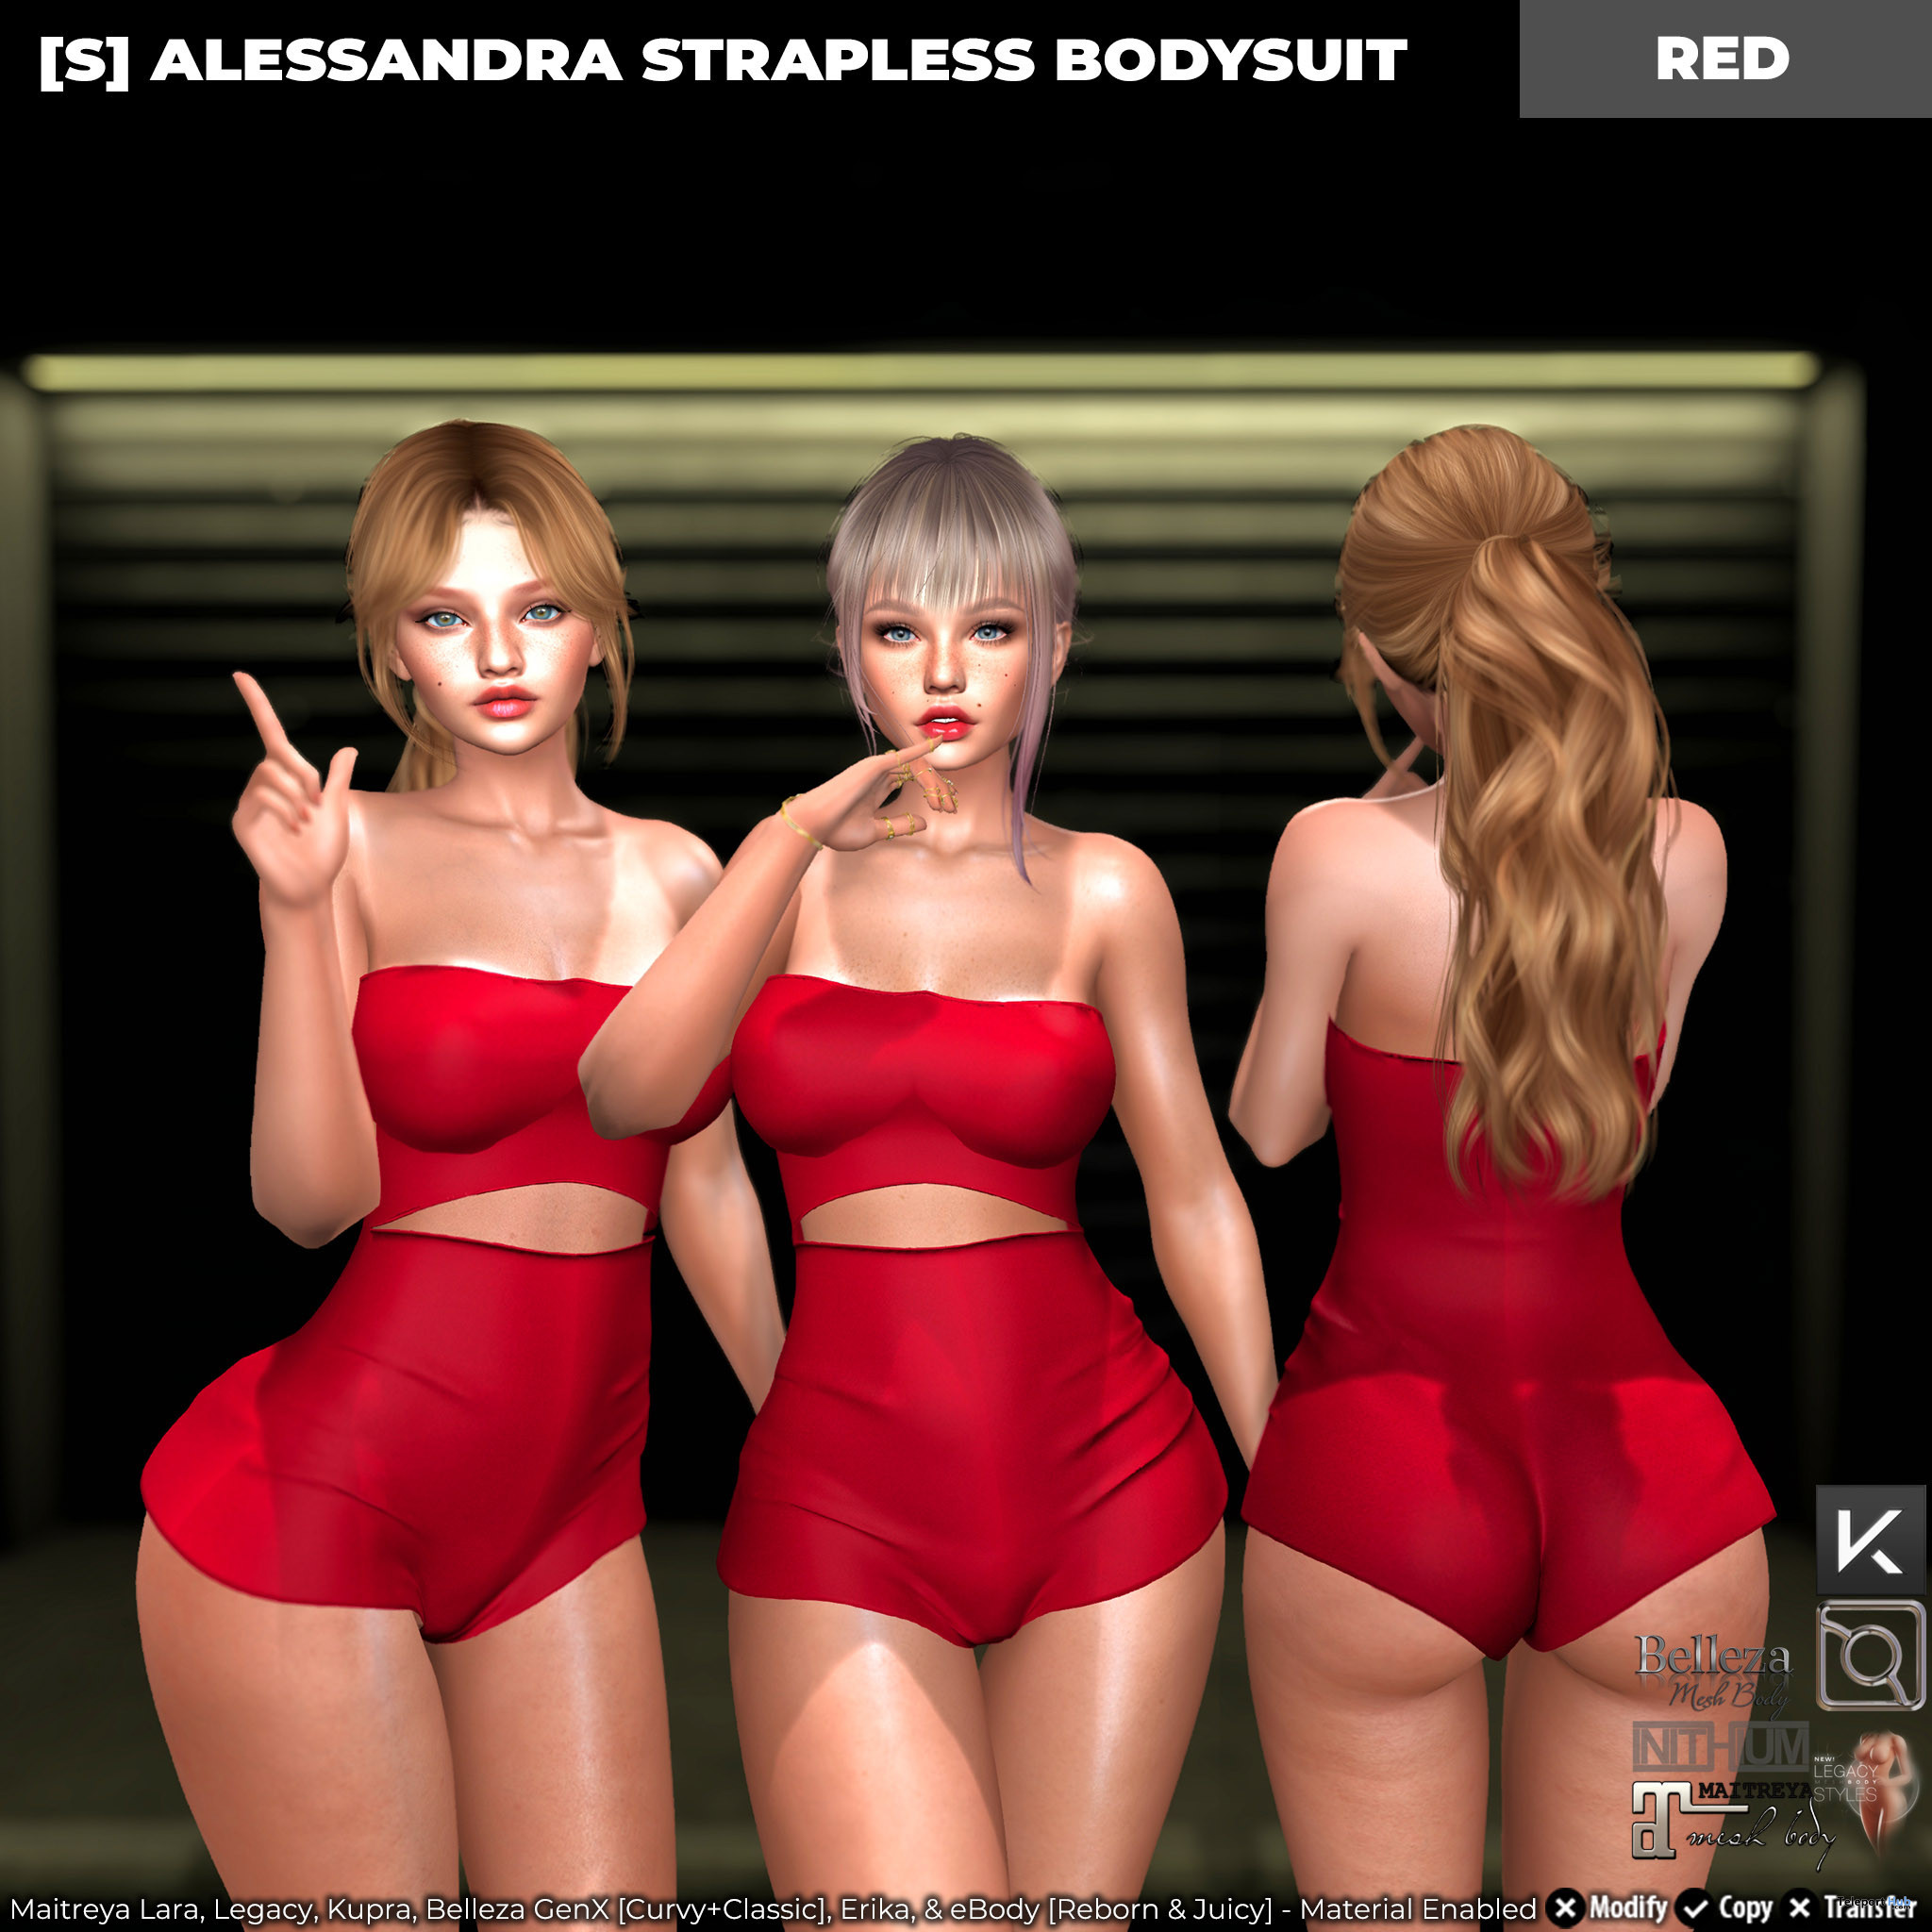 New Release: [S] Alessandra Strapless Bodysuit by [satus Inc